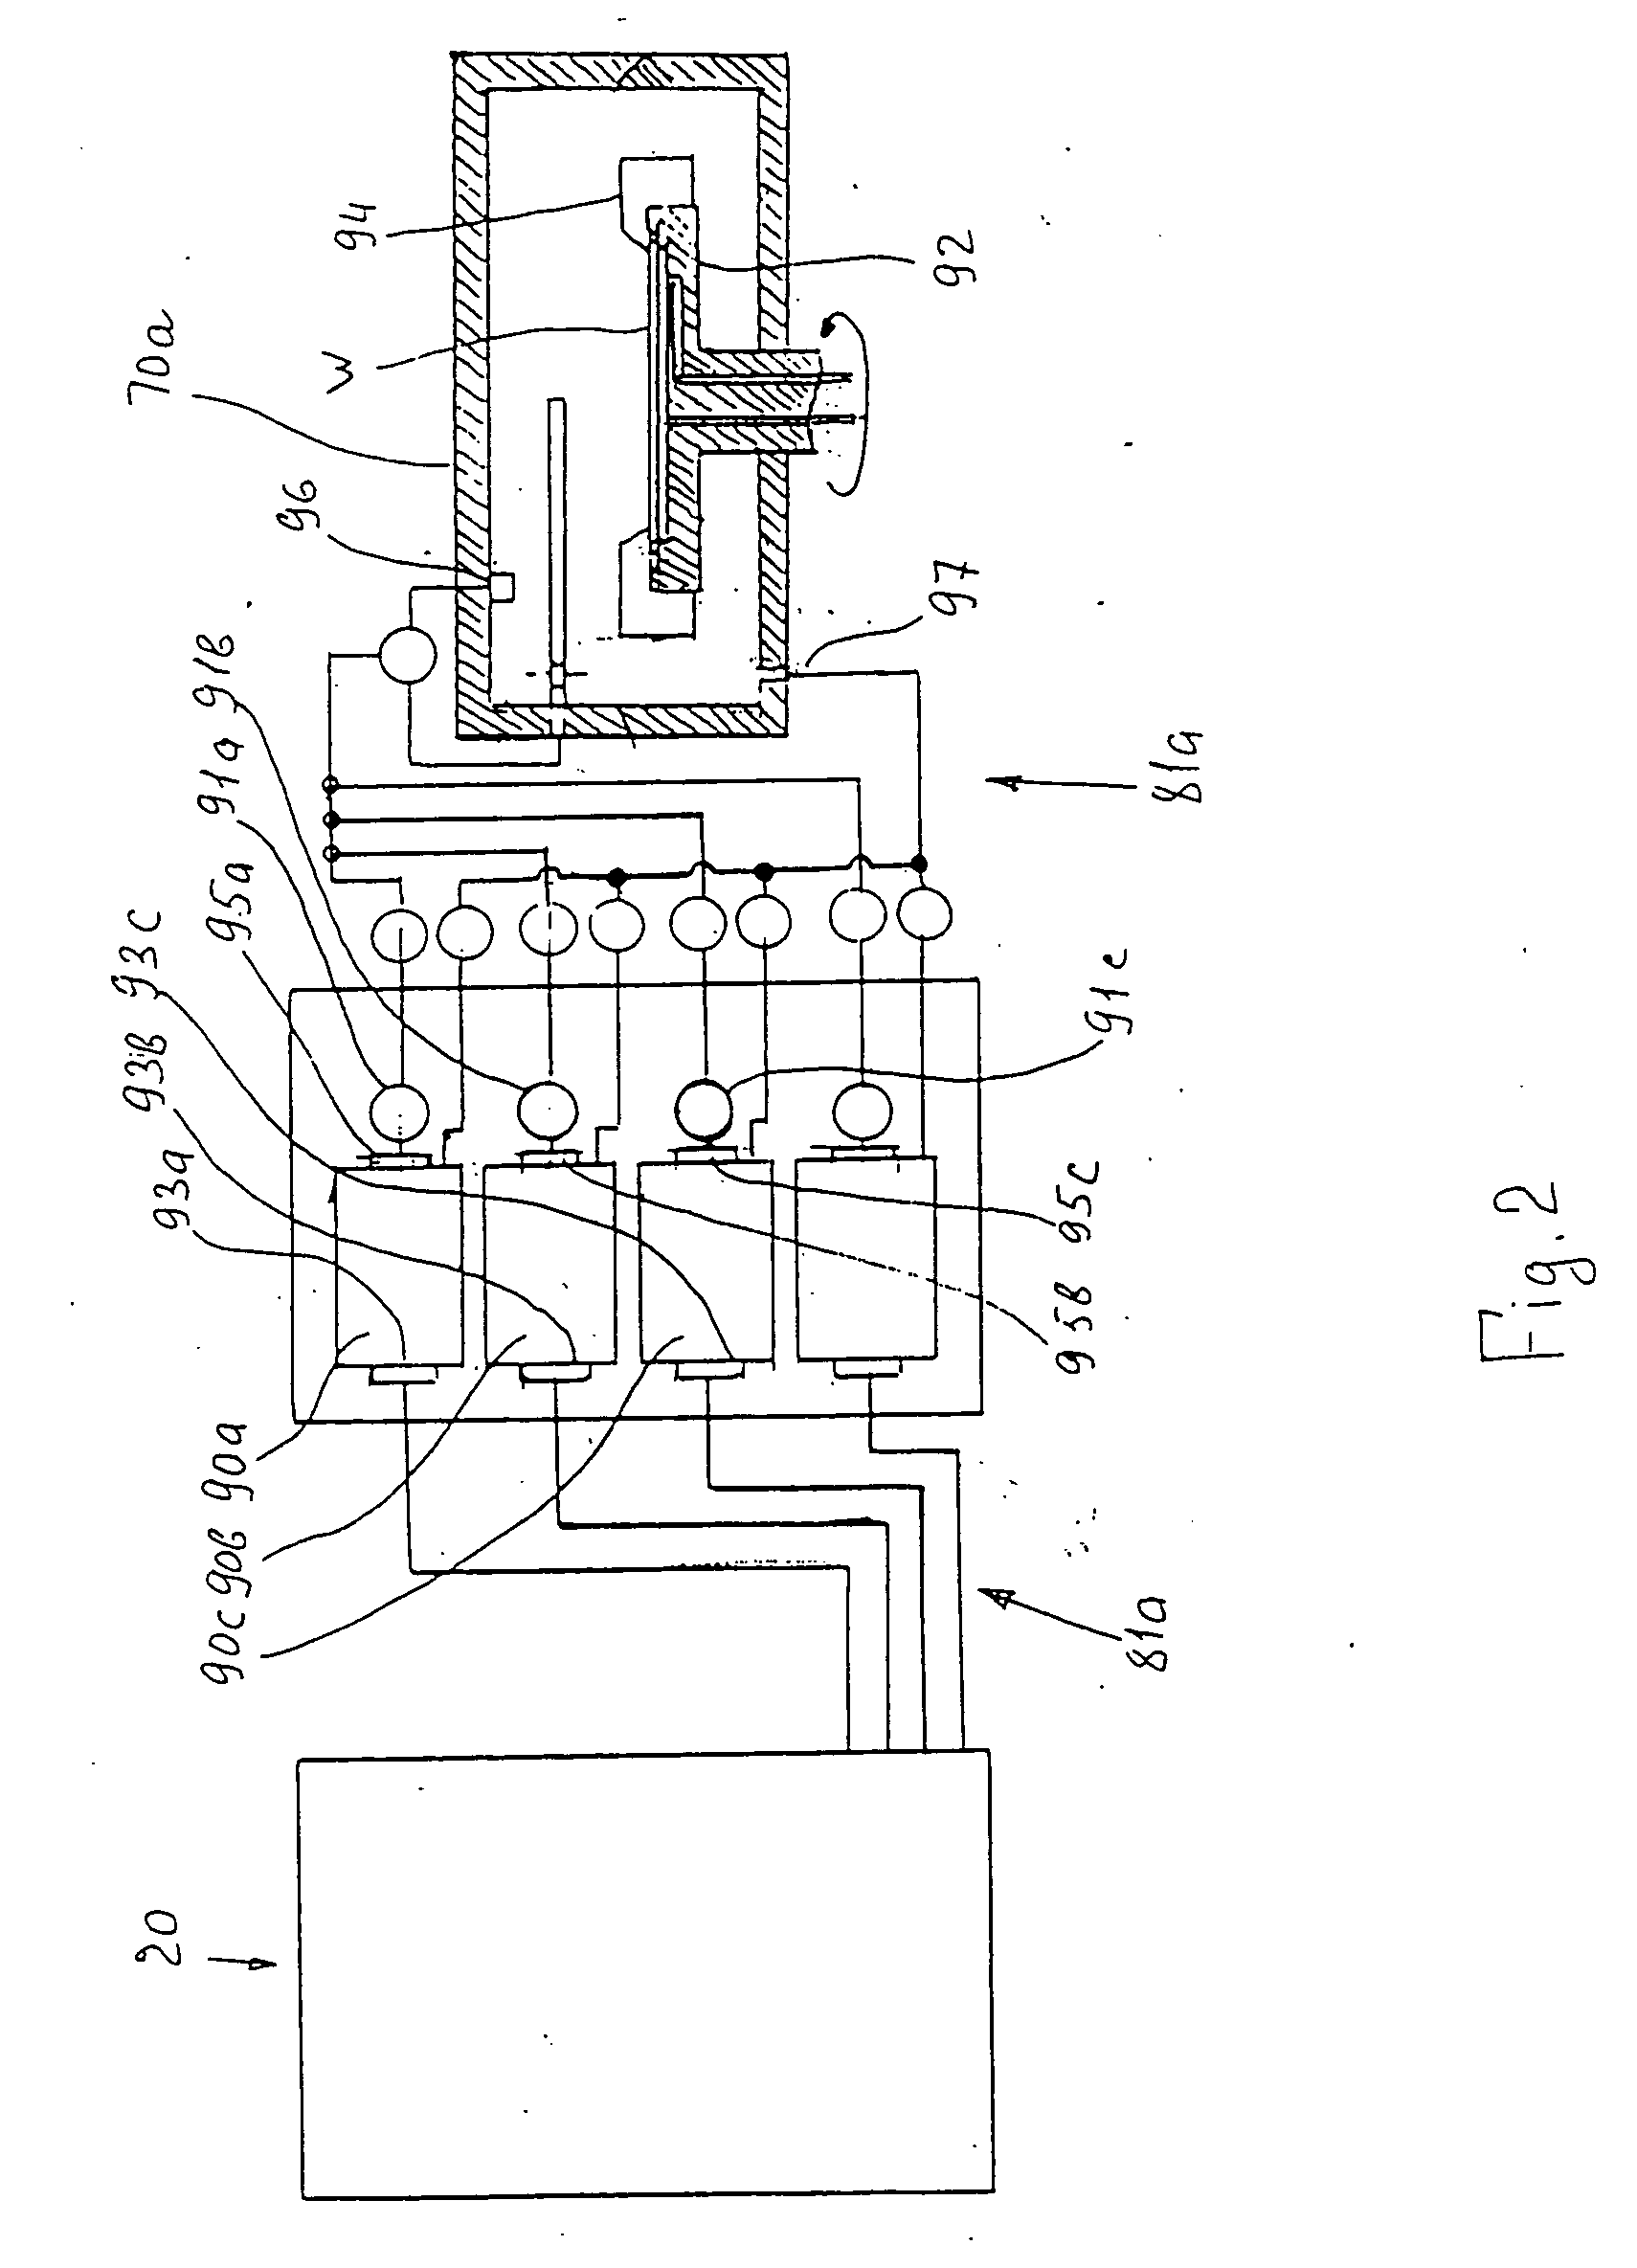 Spatially-arranged chemical processing station